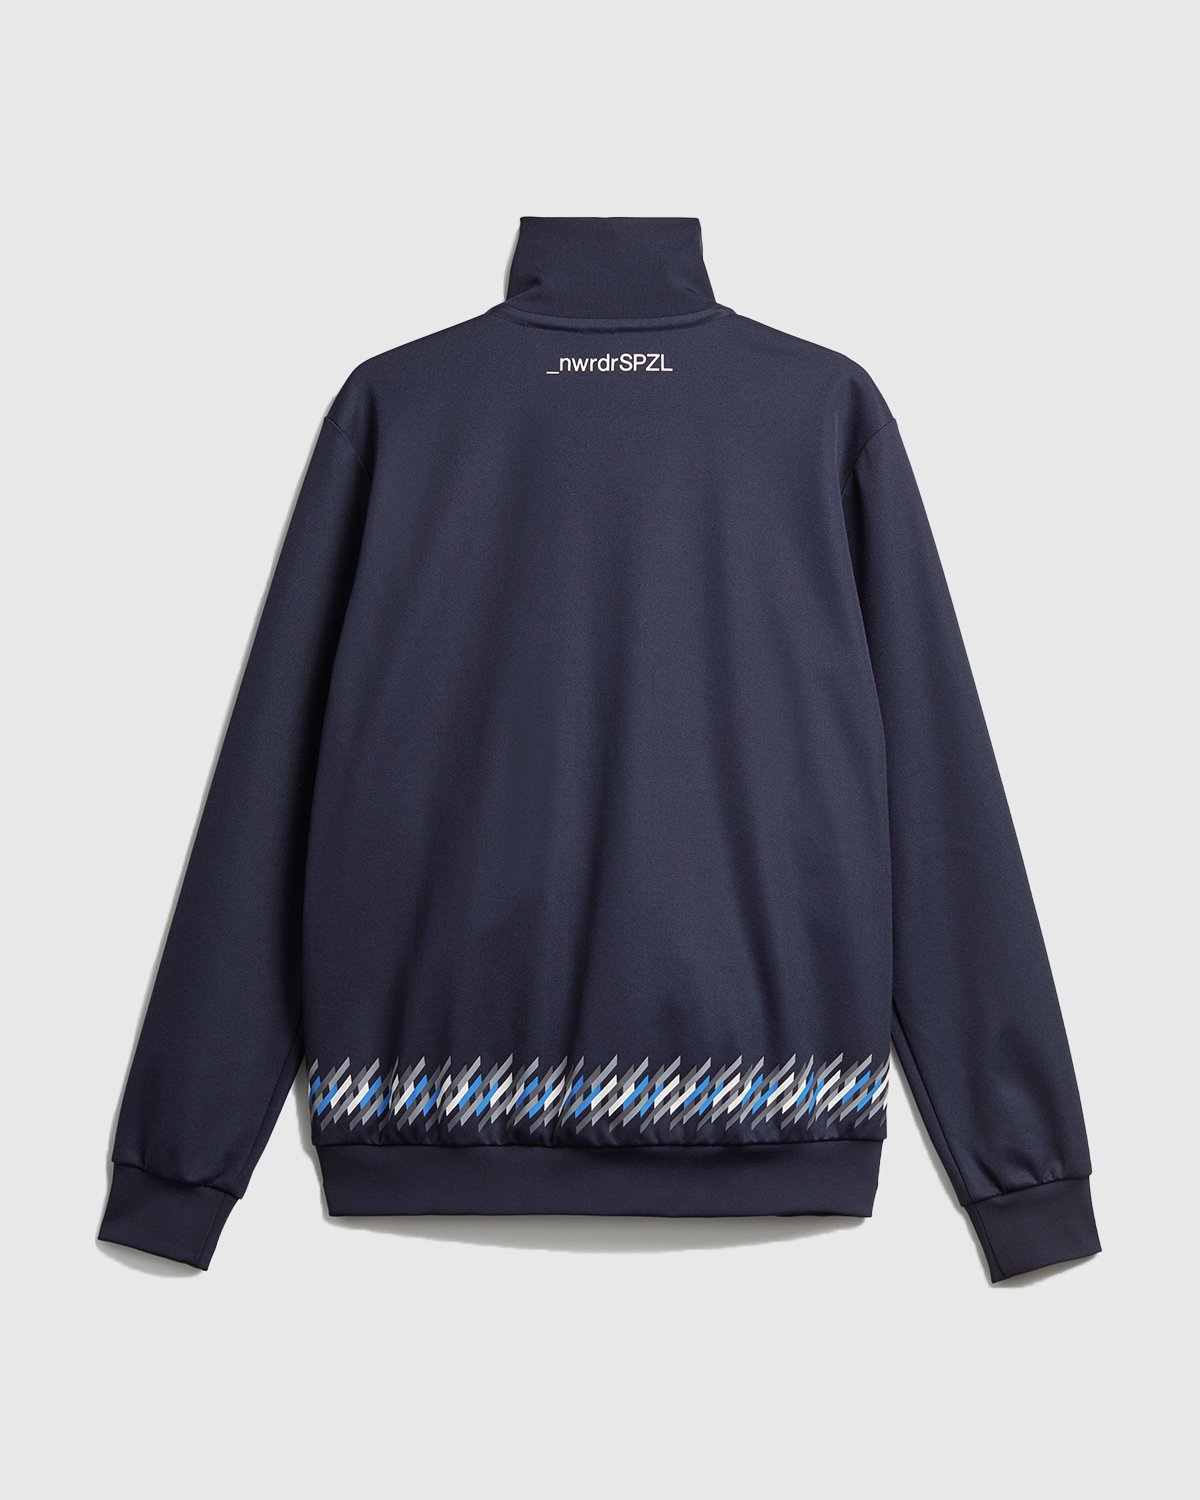 Adidas - Track Top Spezial x New Order Navy - Clothing - Blue - Image 2